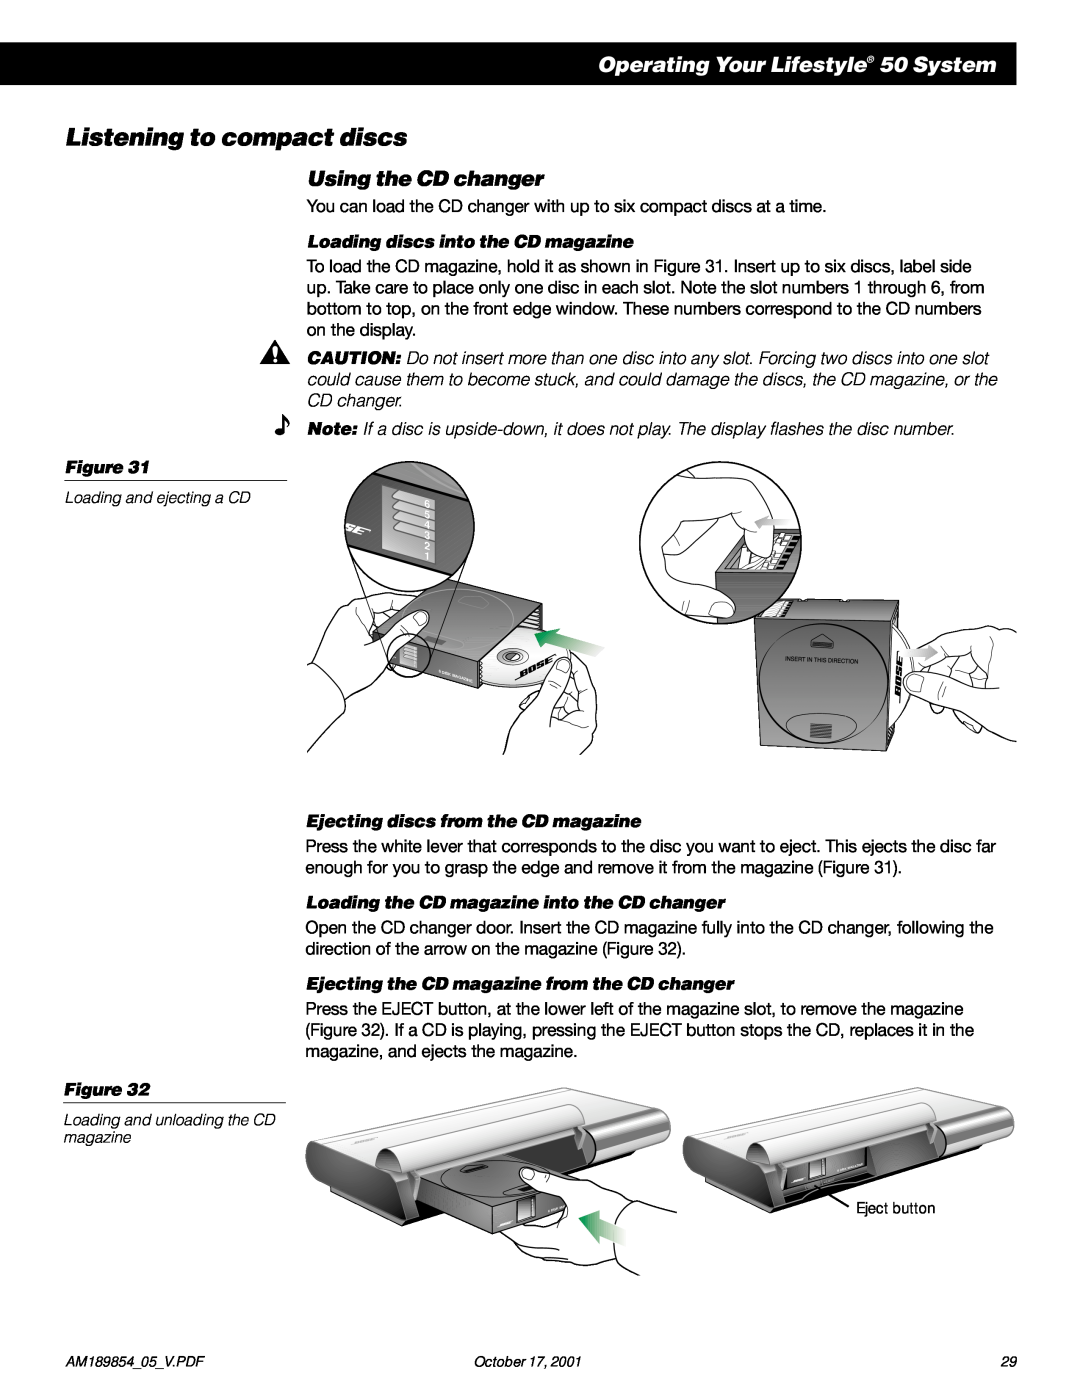 Bose manual Operating Your Lifestyle 50 System, Using the CD changer, Loading discs into the CD magazine 